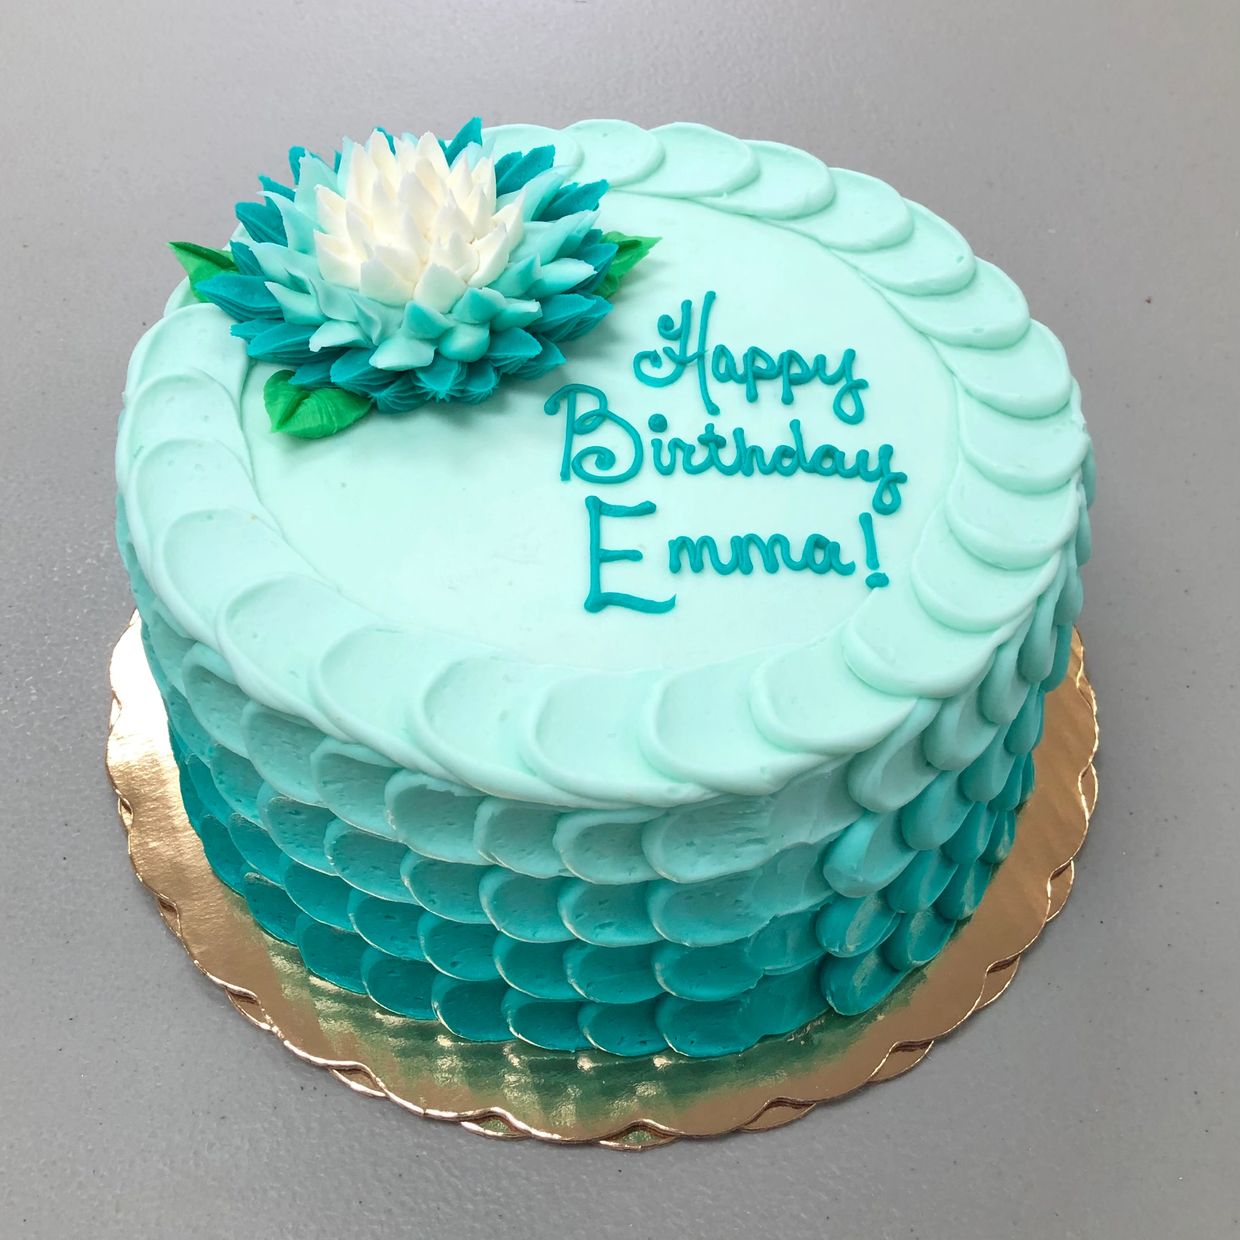 A blue colored birthday cake to Emma with flower